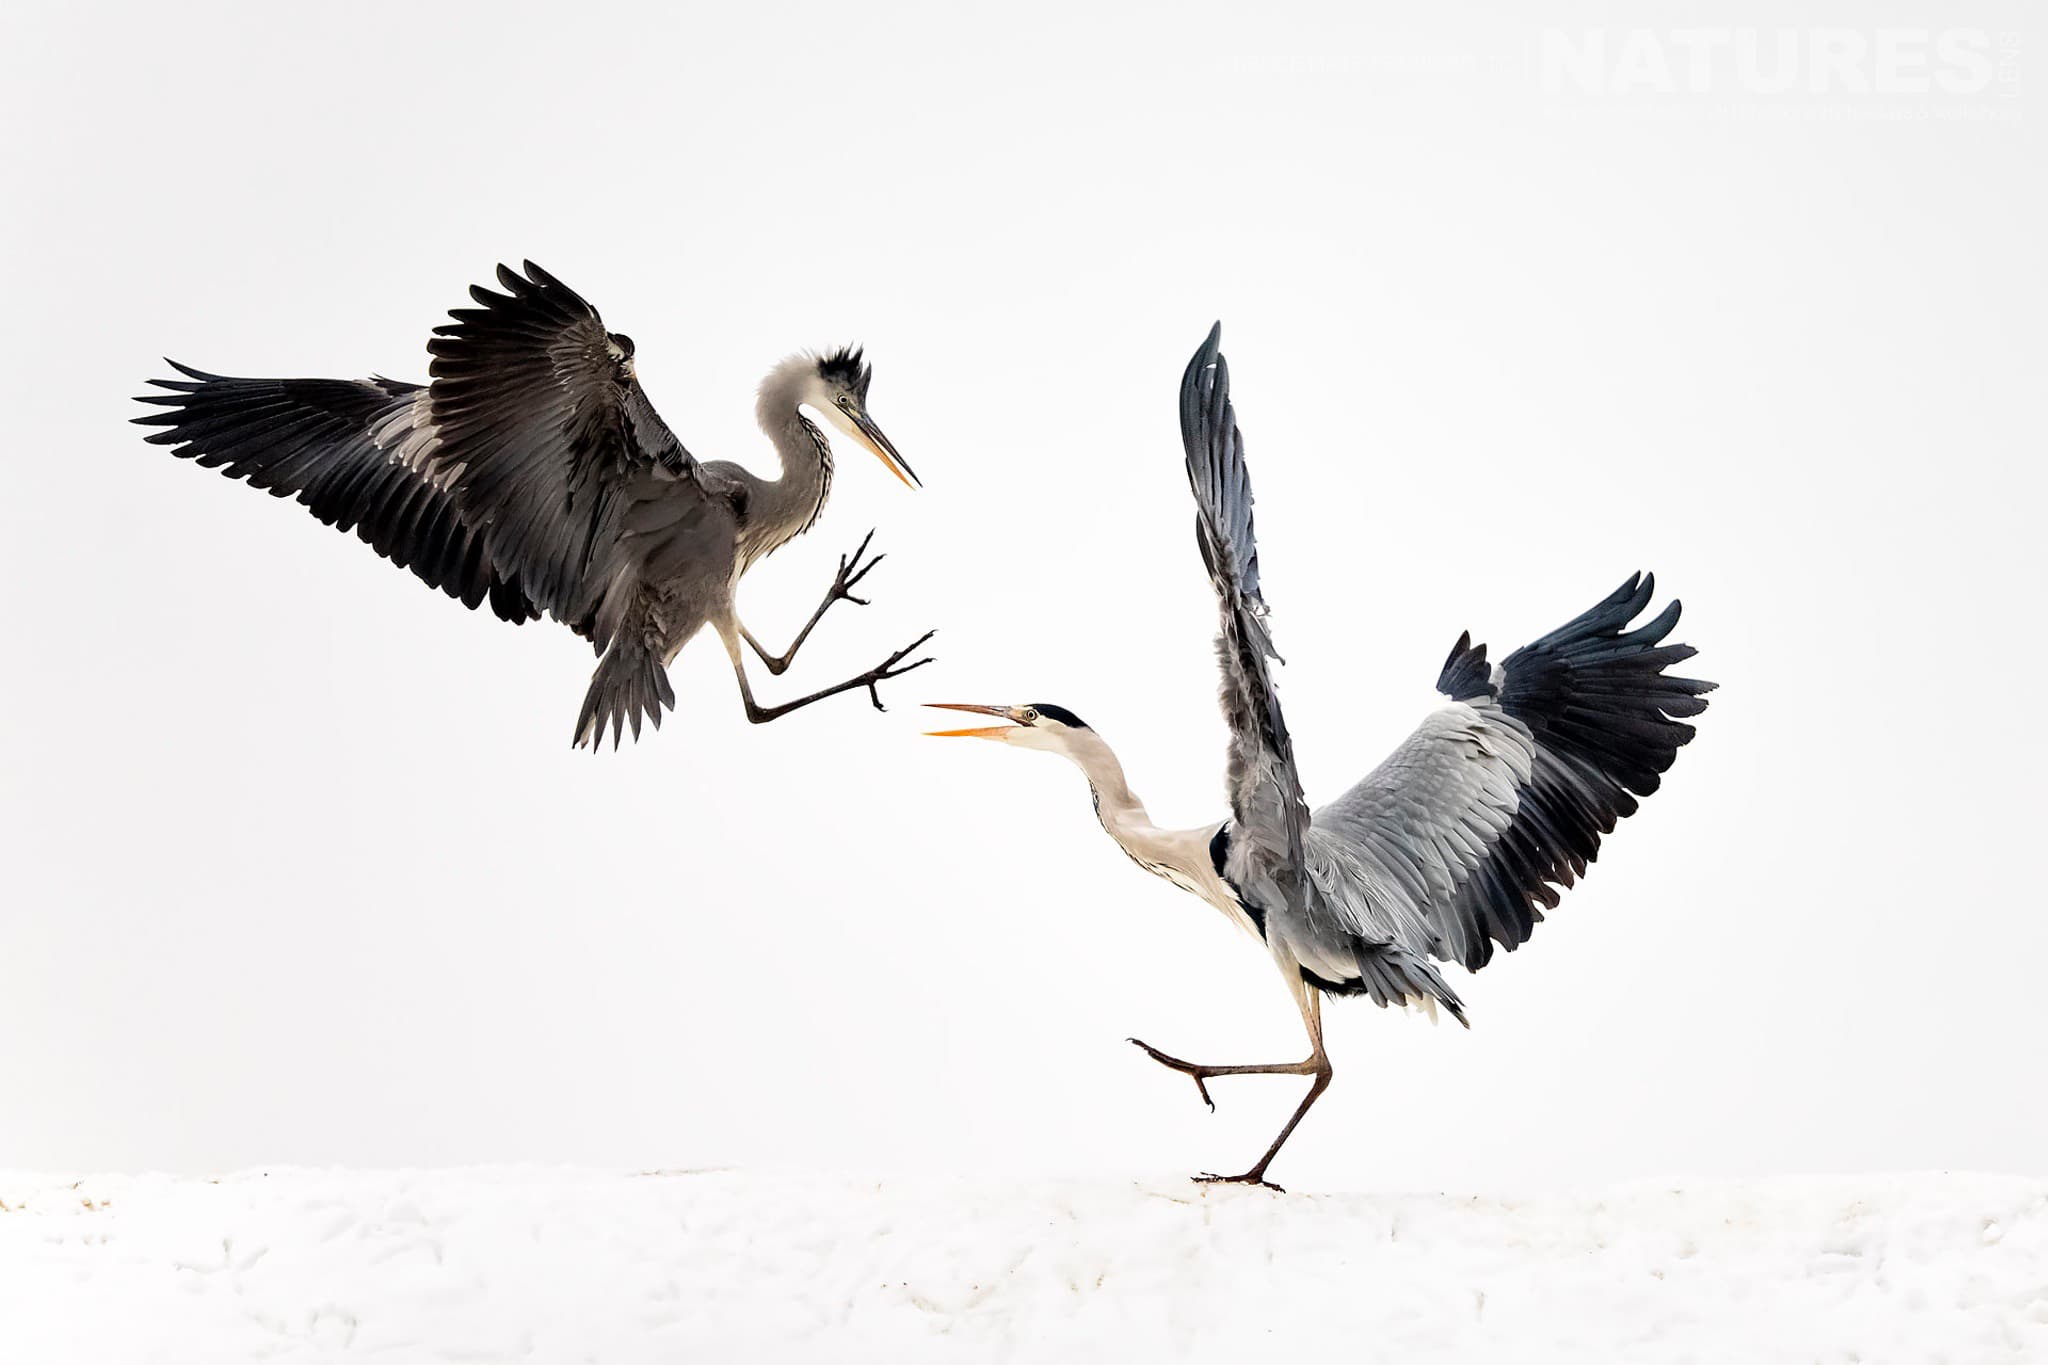 Fighting herons at Bence Mátés Photography Hides during the Hungarian Winter